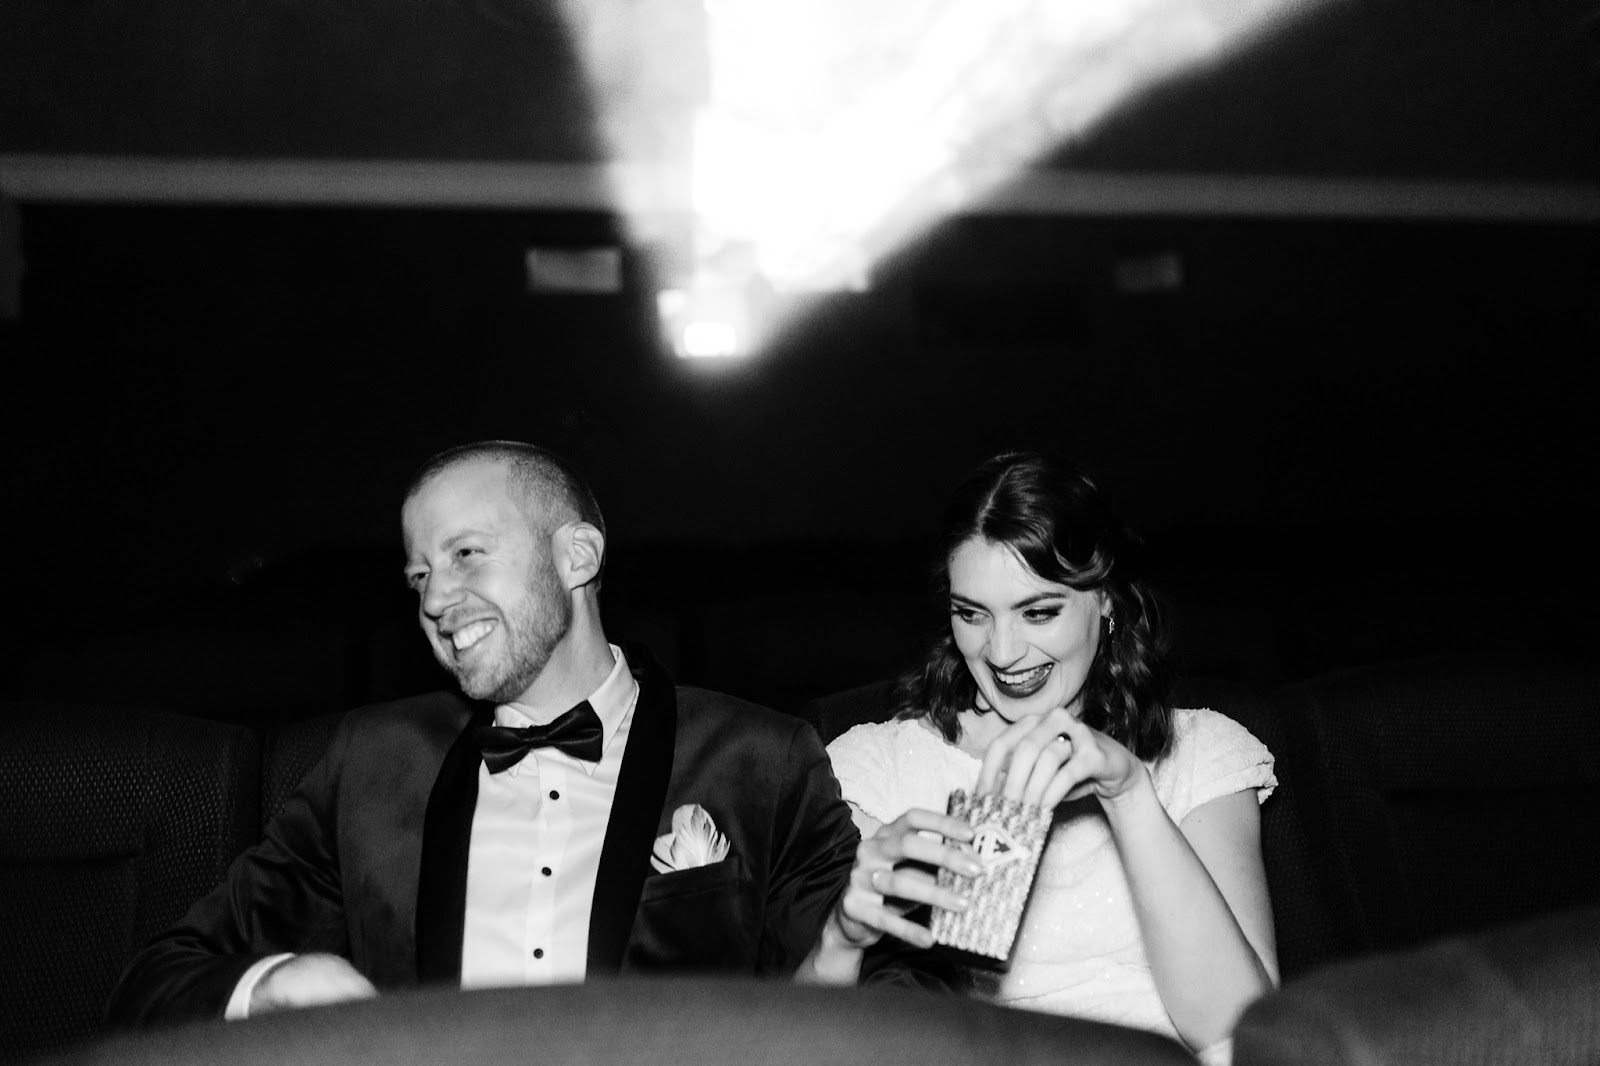 Bride and groom portraits in The Regal cinema Adelaide candid style of wedding photography